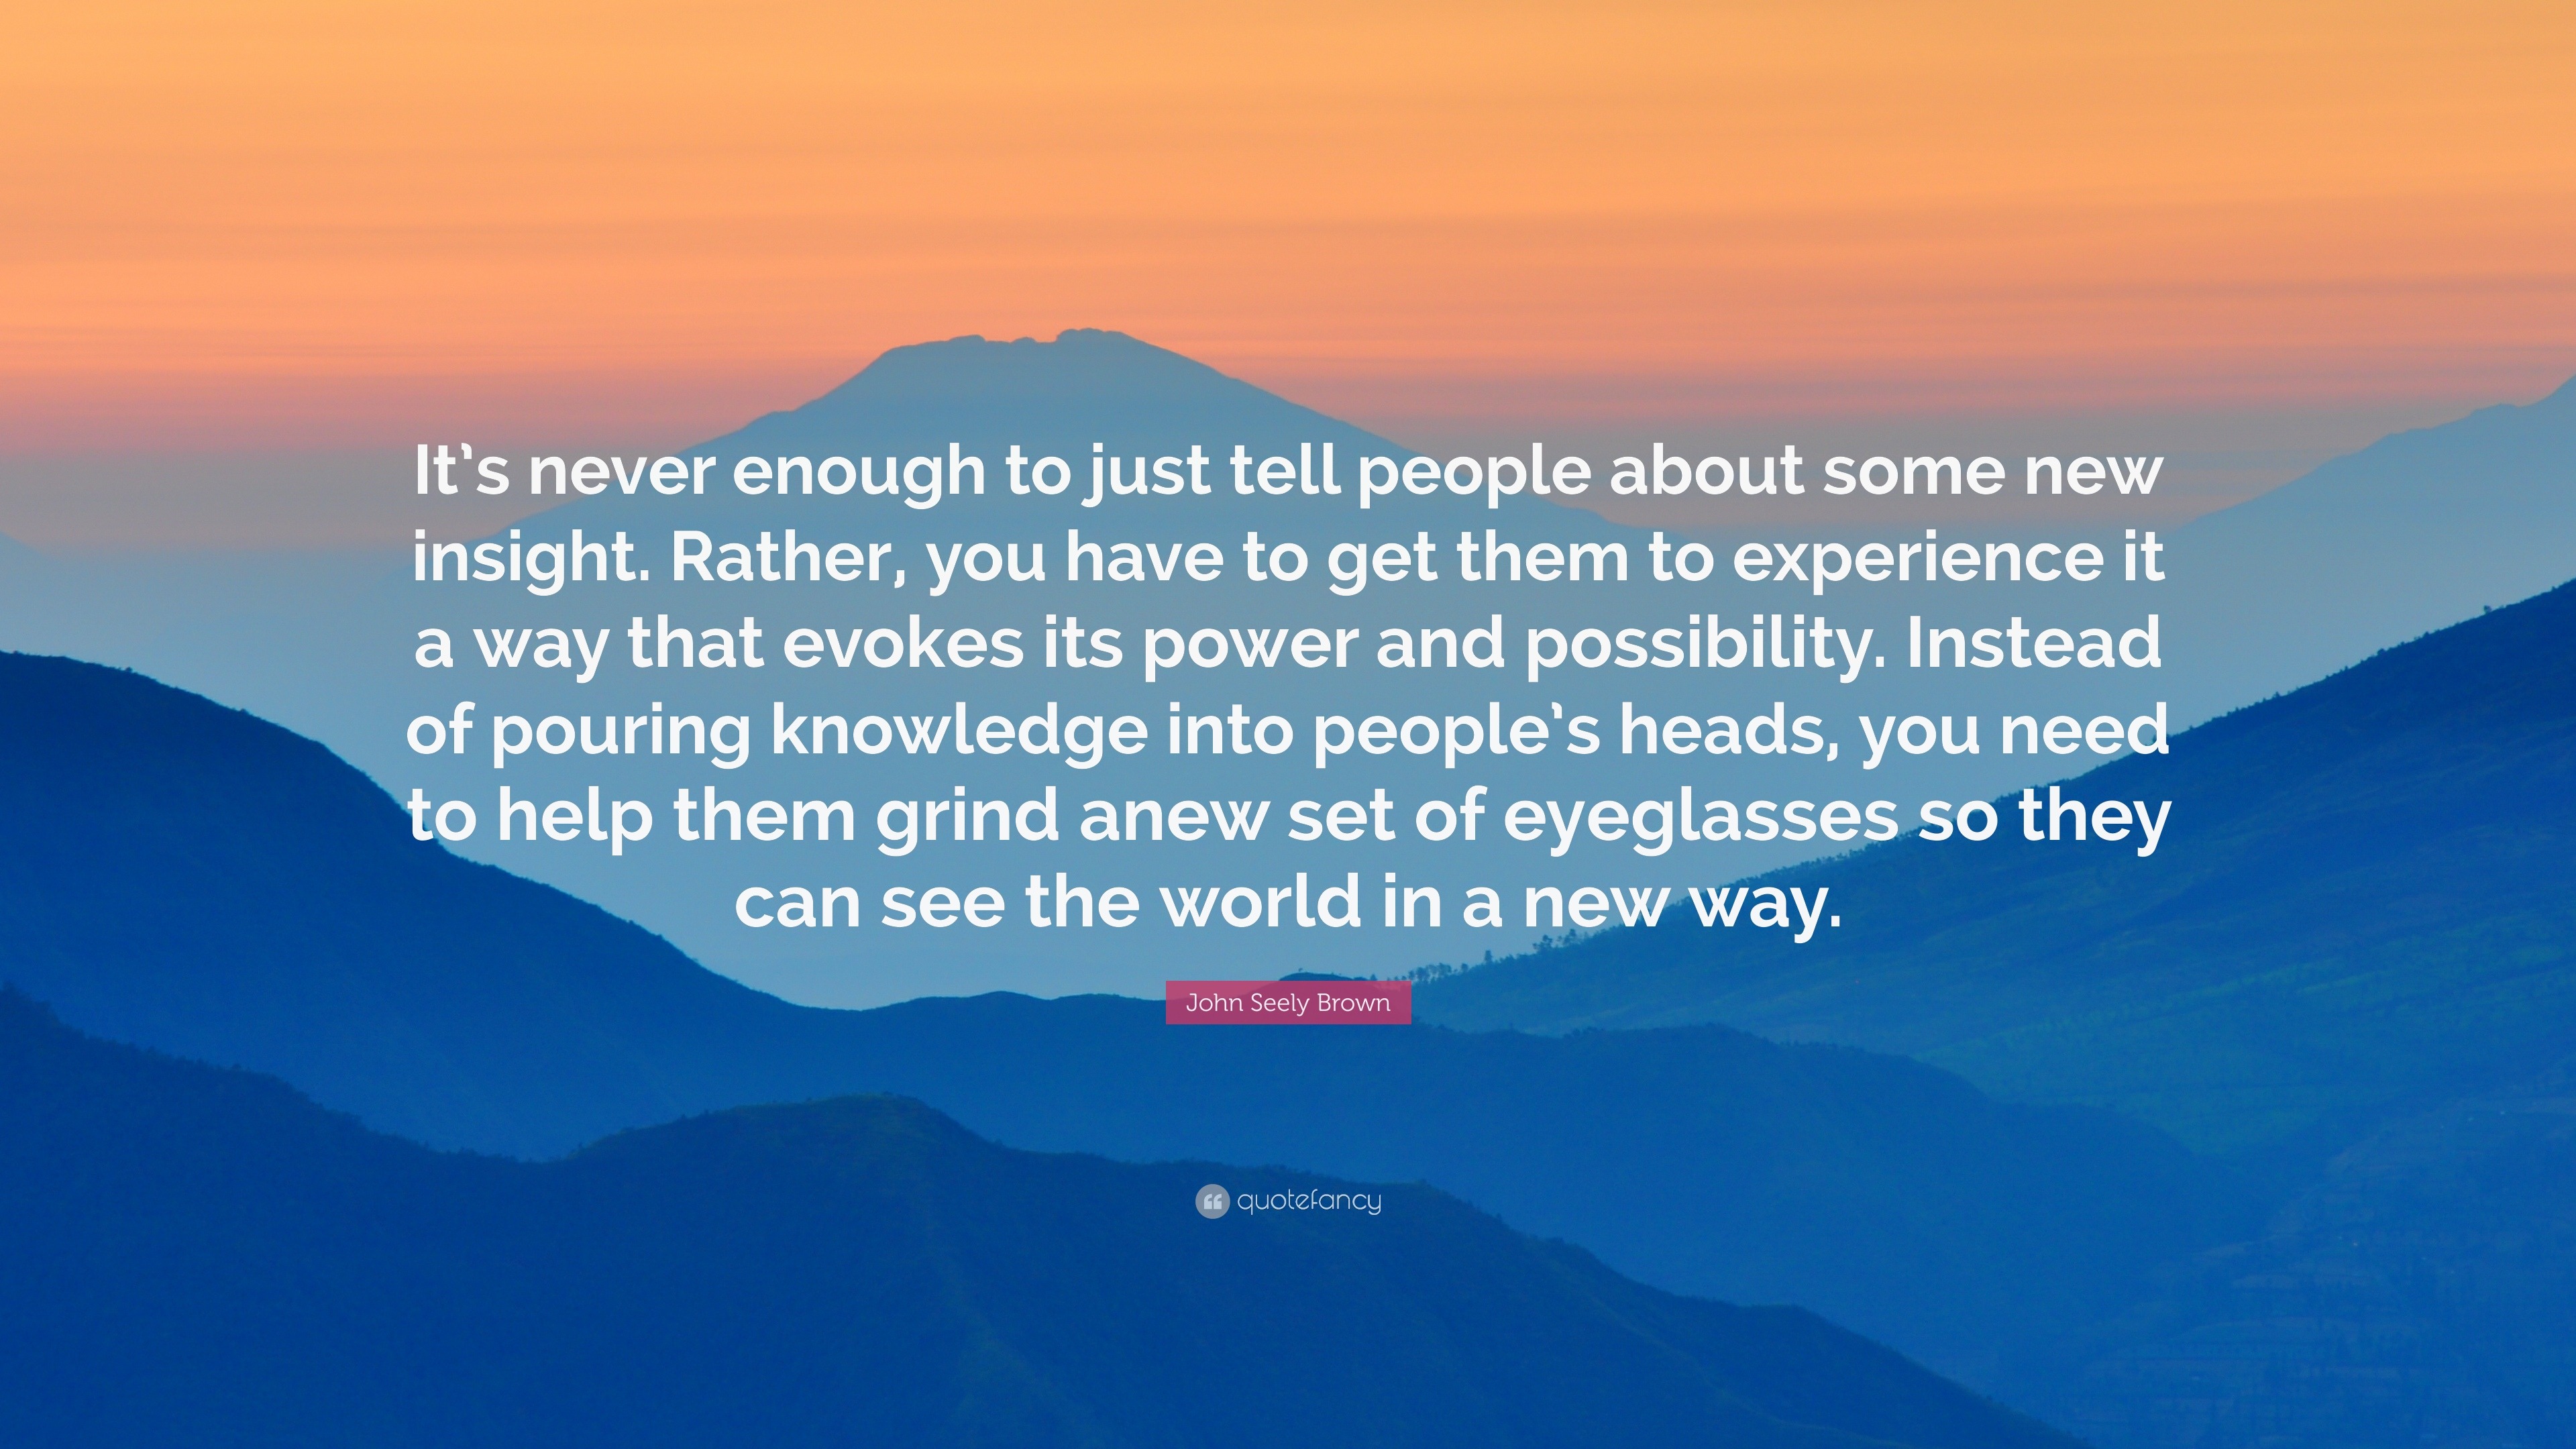 John Seely Brown Quote: “It’s never enough to just tell people about